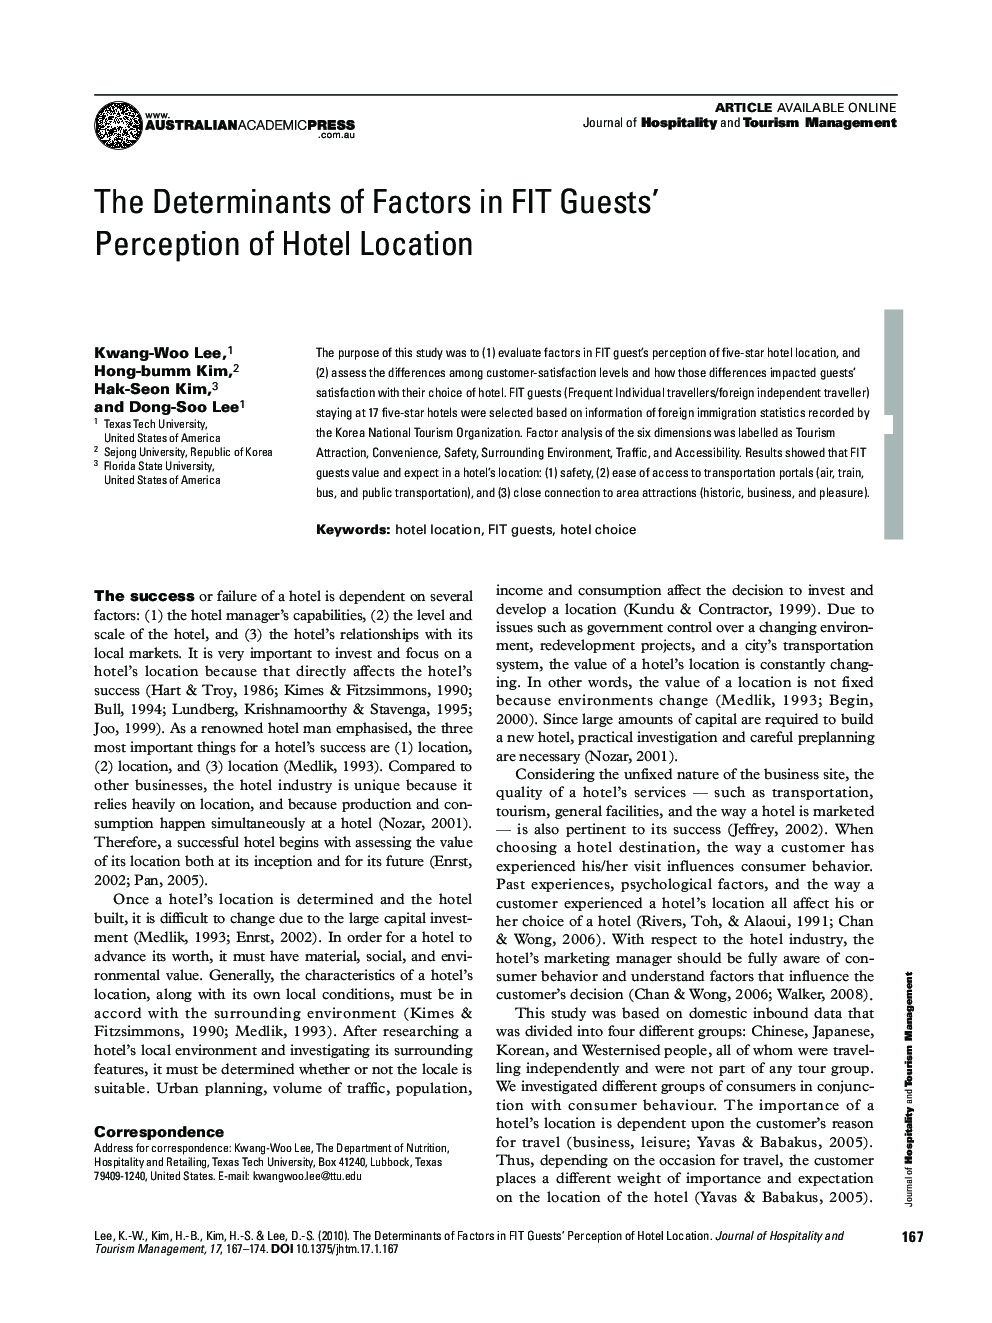 The Determinants of Factors in FIT Guests' Perception of Hotel Location